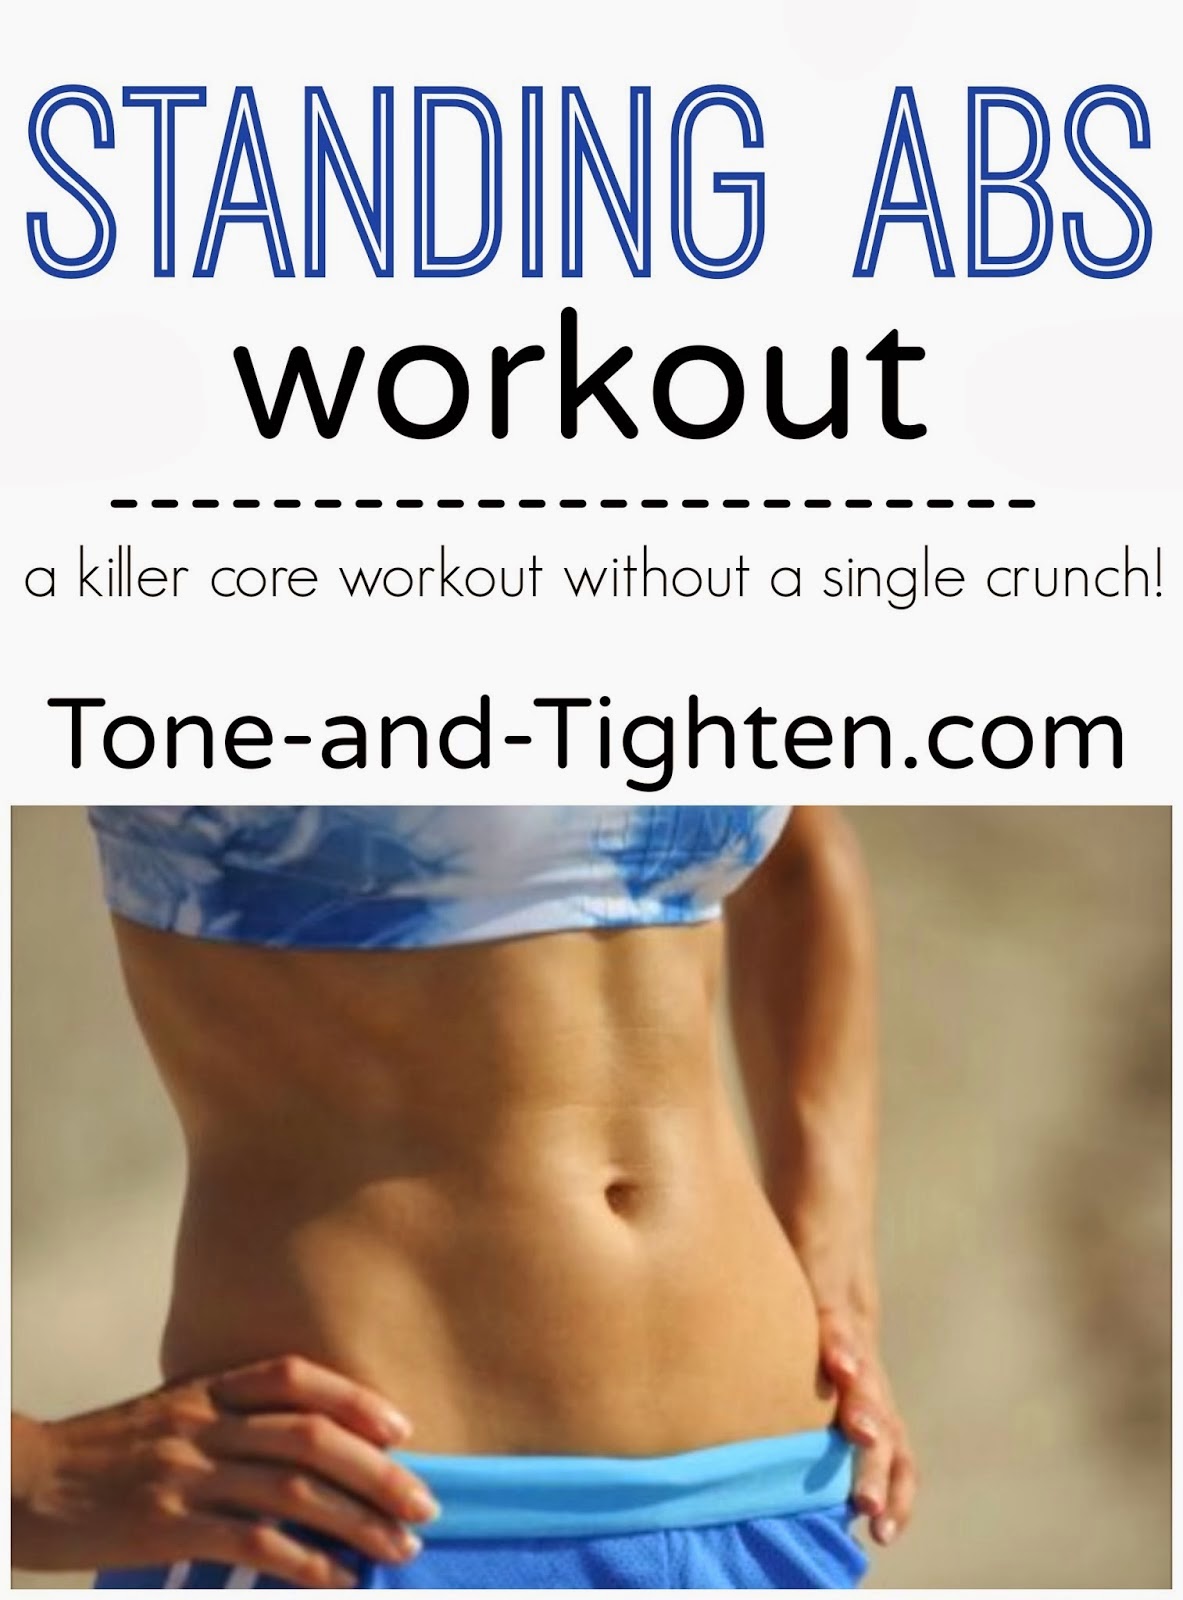 https://tone-and-tighten.com/2014/02/standing-abs-workout.html